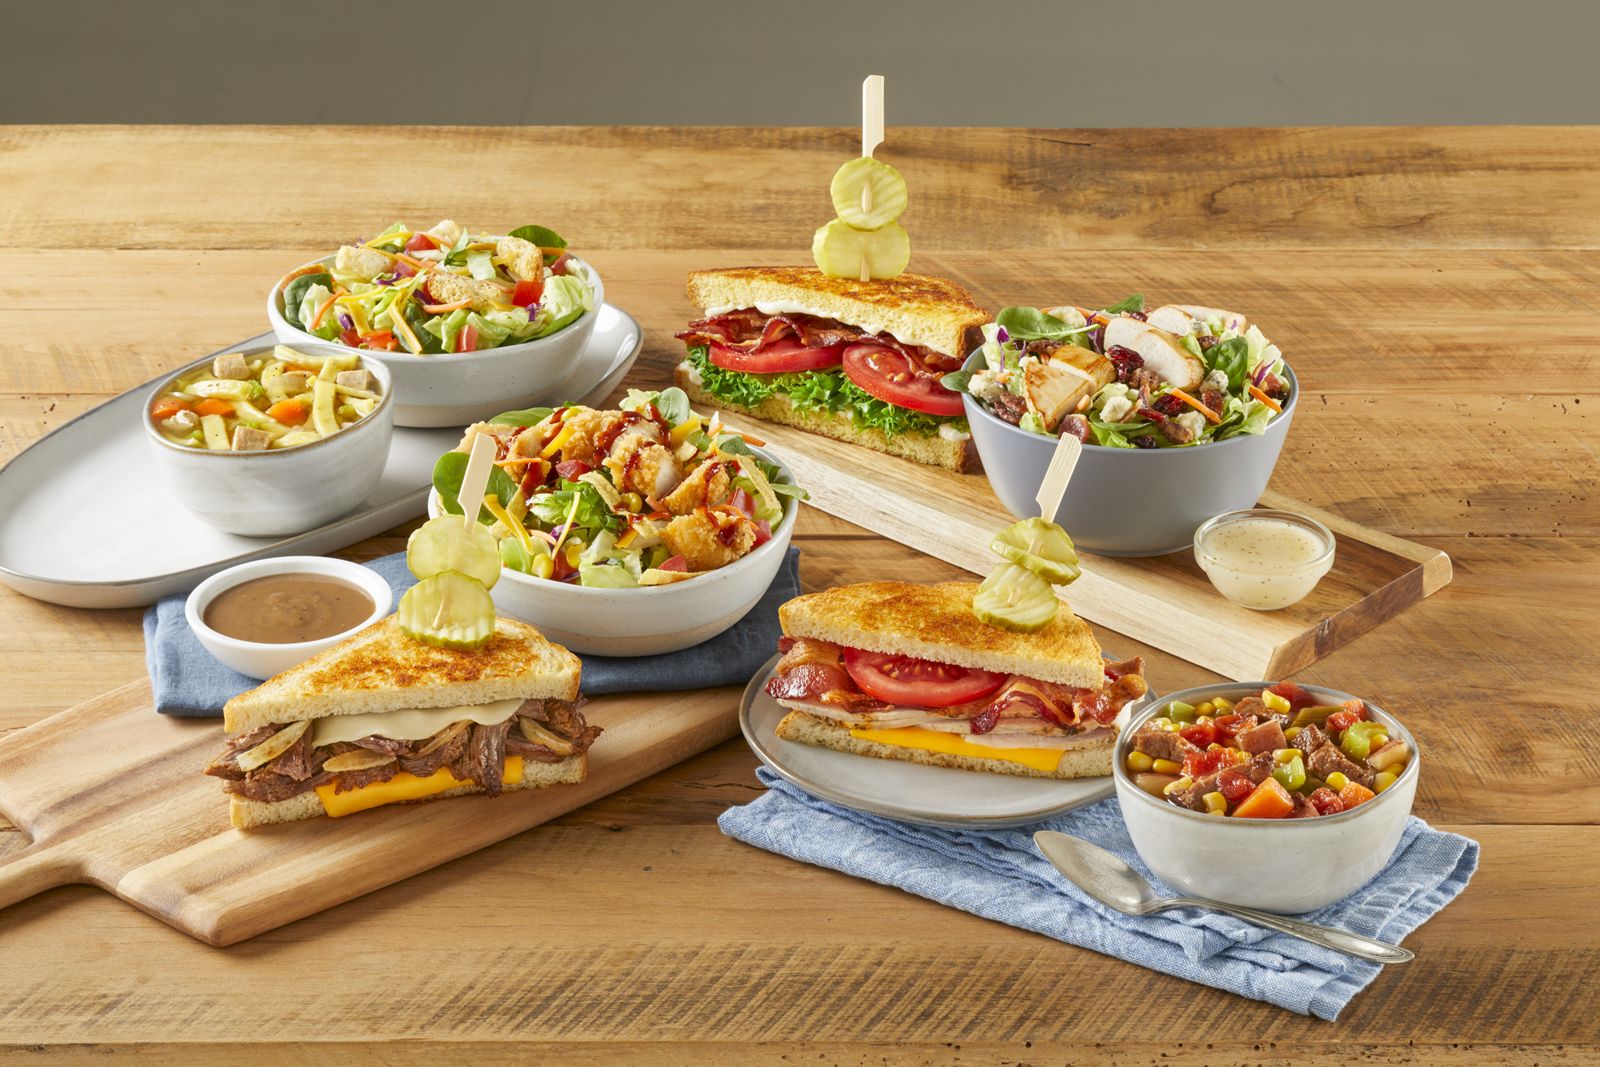 Bob Evans Restaurants Introduces New Pick 2 Combos for Lunch